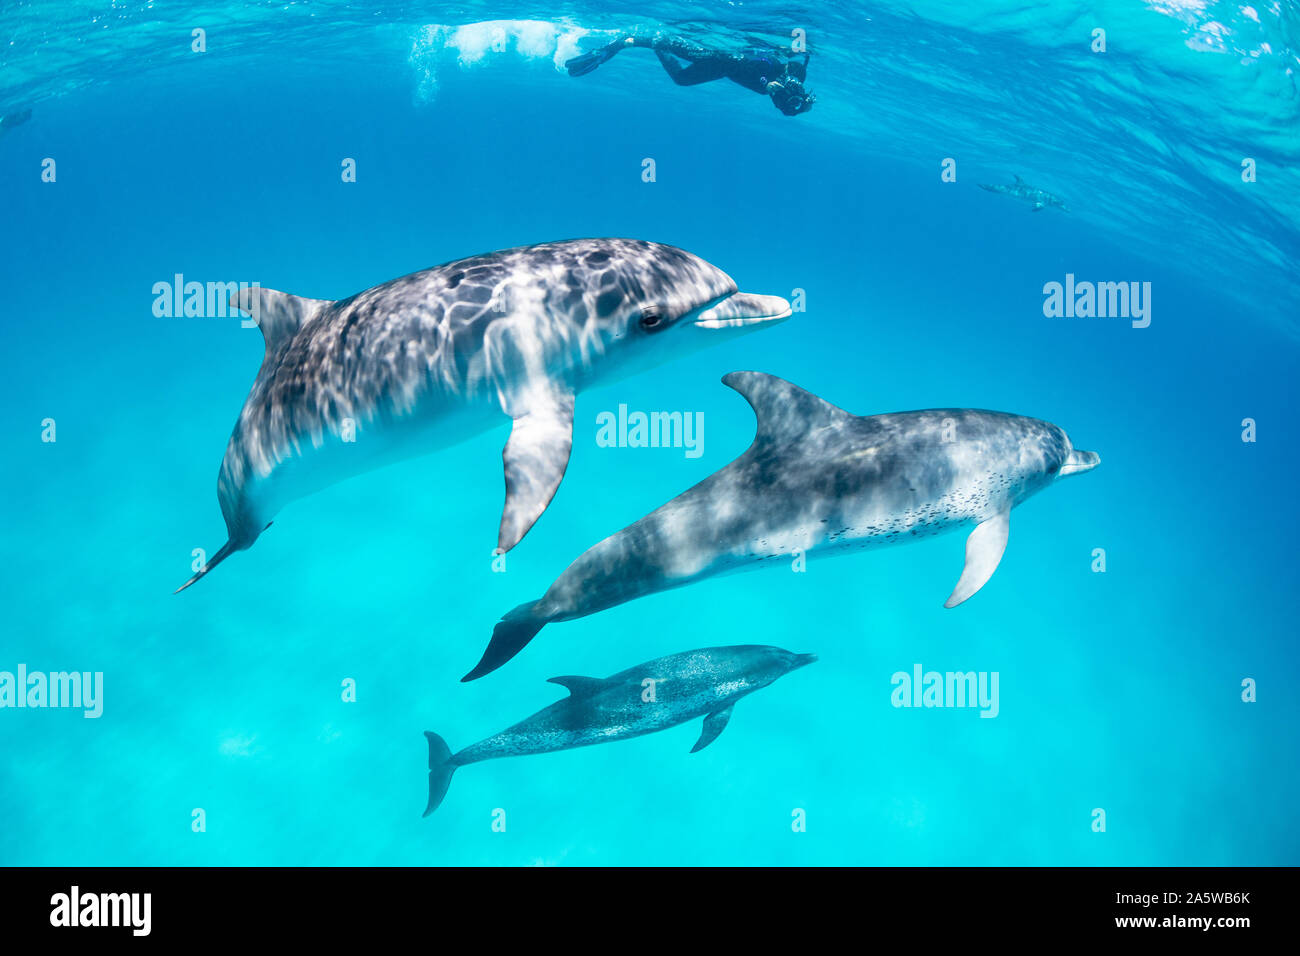 Several Atlantic Spotted Dolphins (Stenella frontalis) swim below the ocean surface in this underwater photo from Bimini, Bahamas. A snorkeler shoots Stock Photo